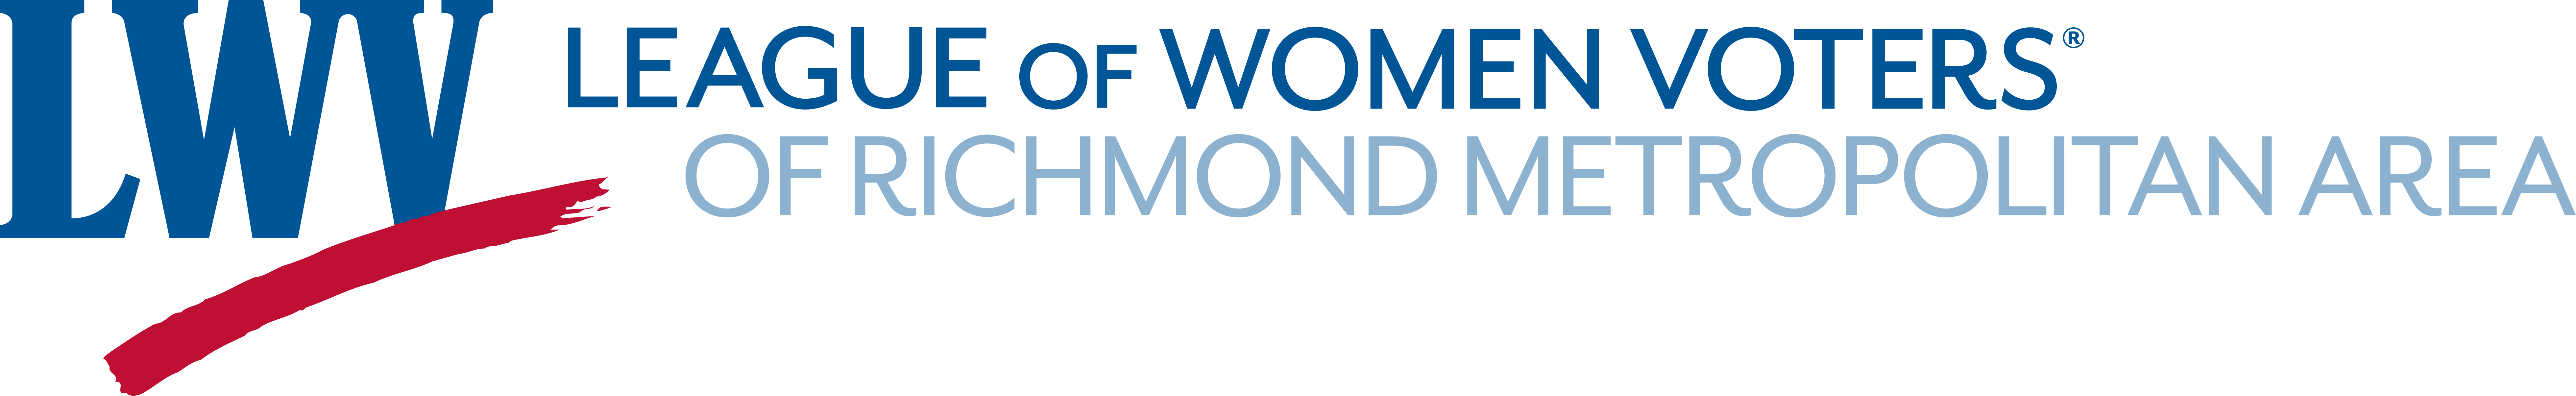 League of Women voters logo of metropolitan Richmond logo in navy, red, and white